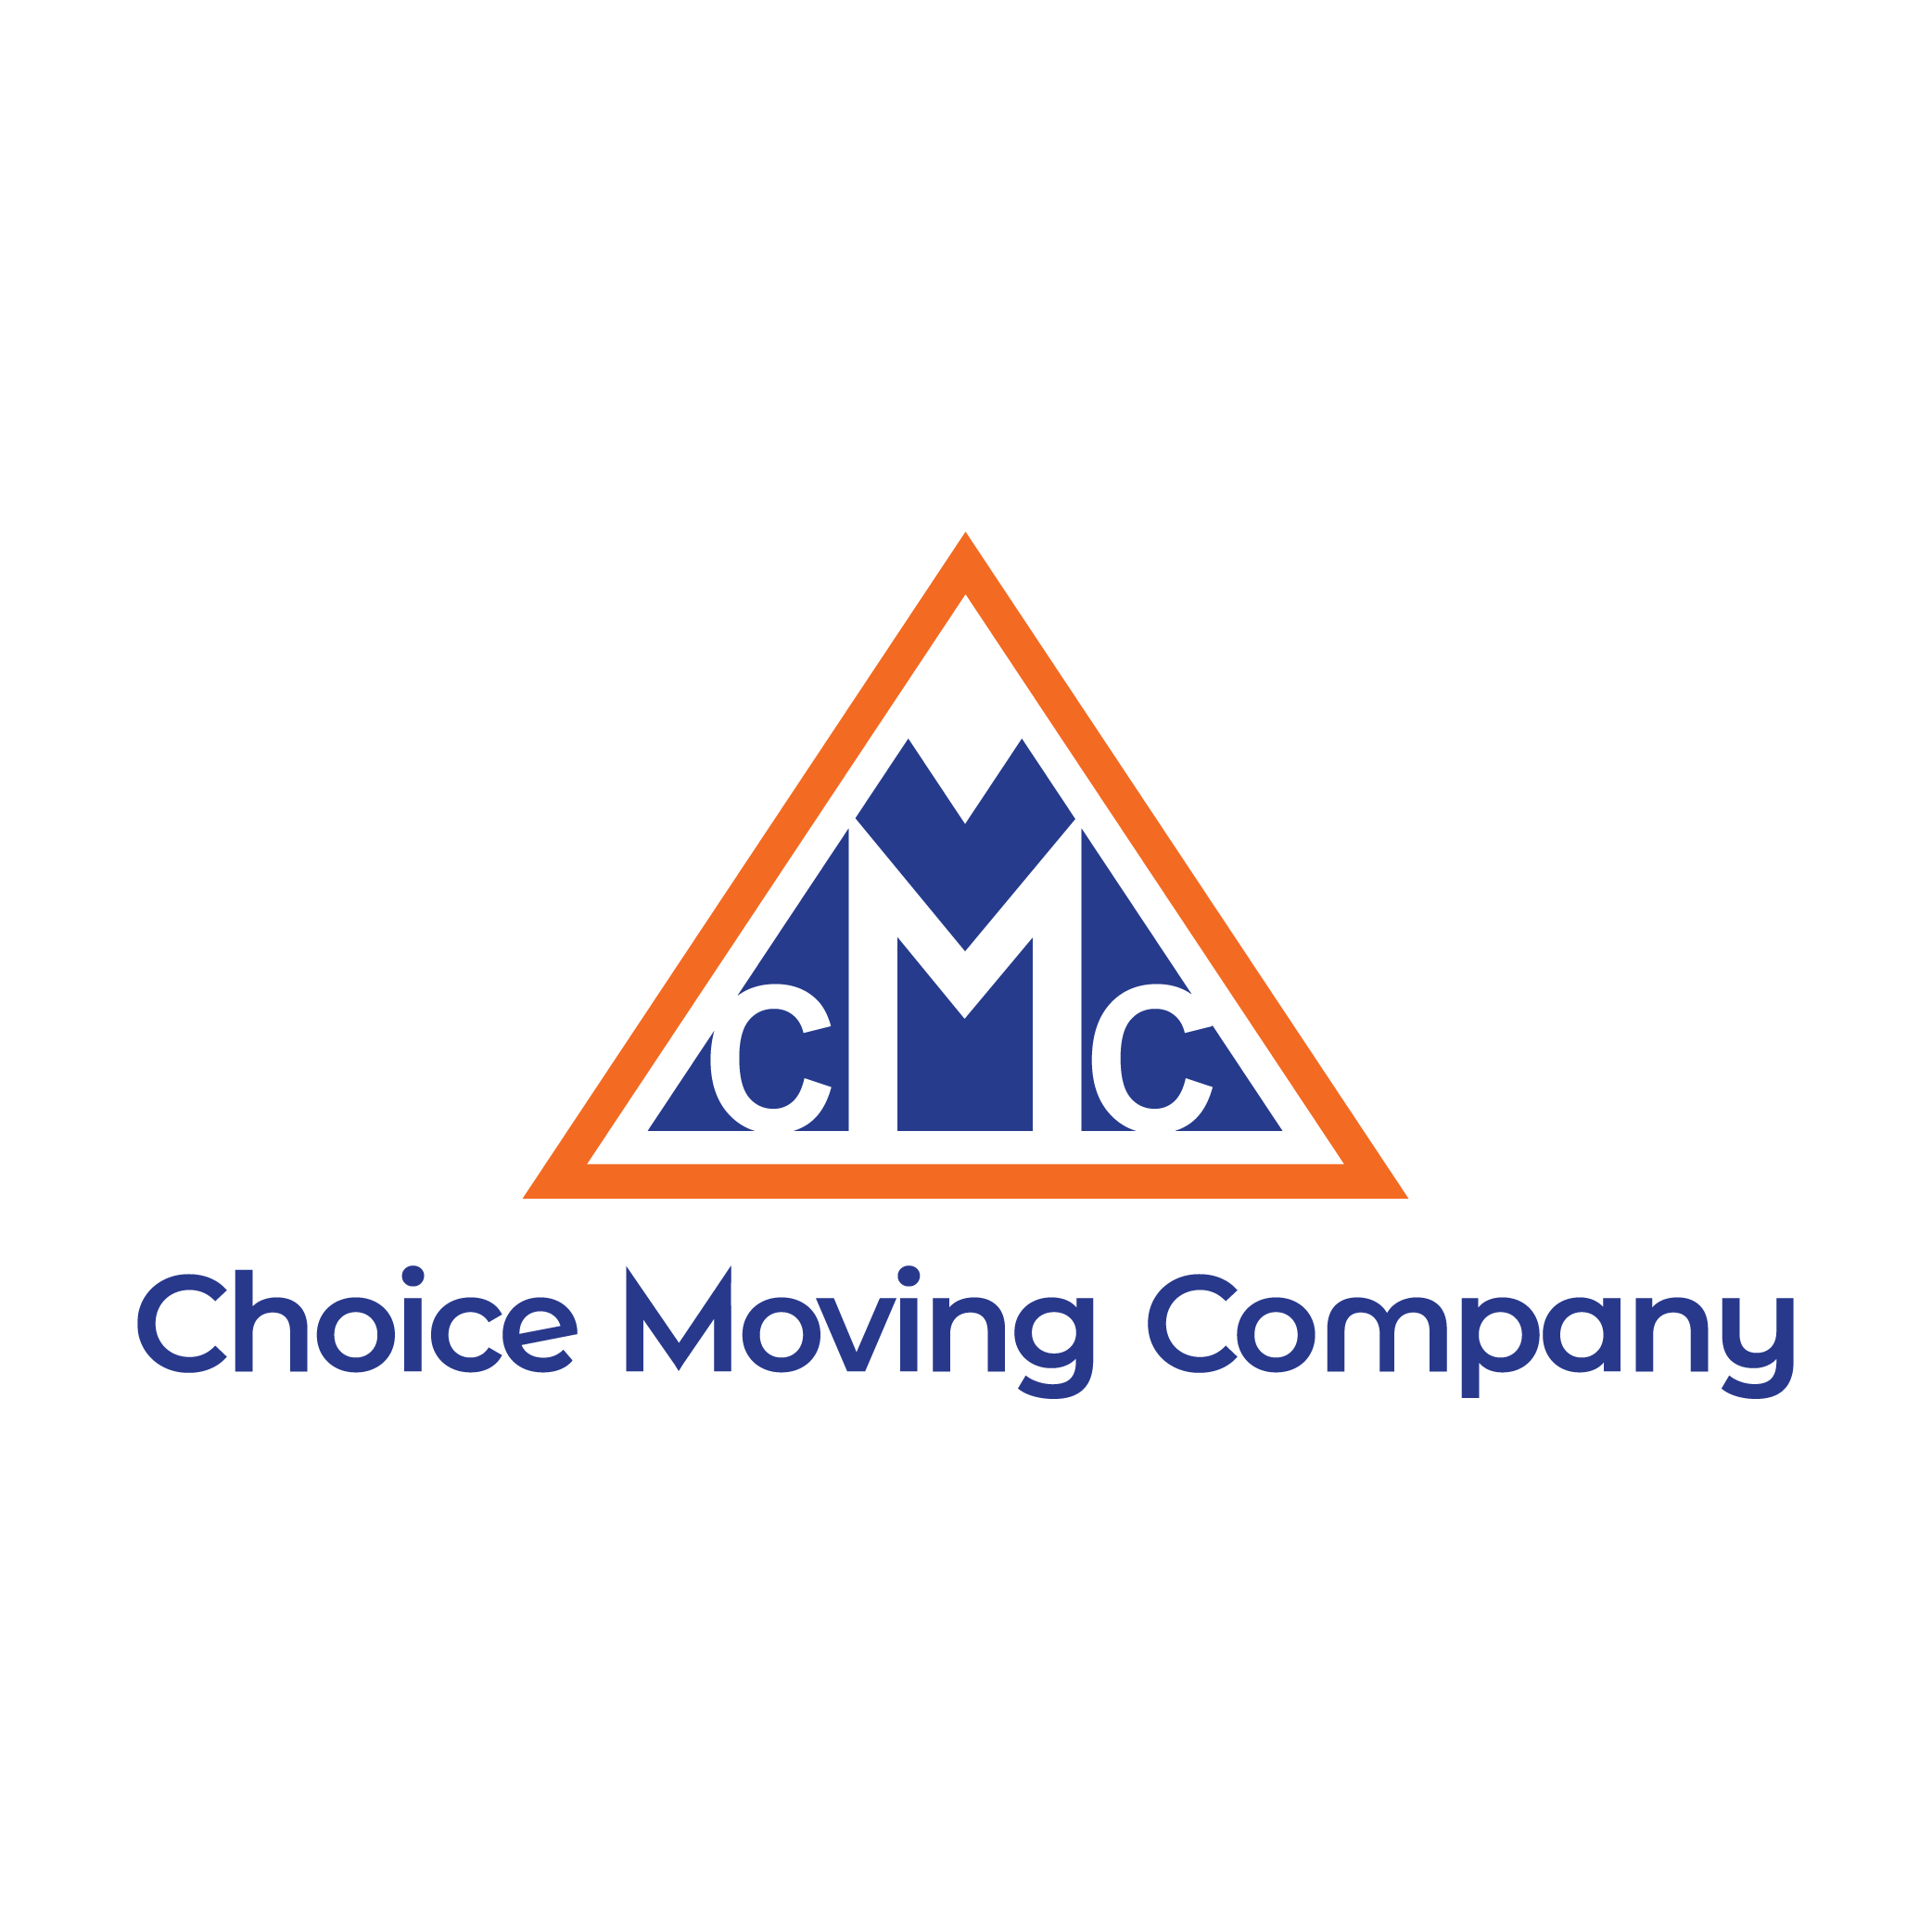 Choice Moving Company - Fort Collins, CO 80525 - (970)658-7627 | ShowMeLocal.com